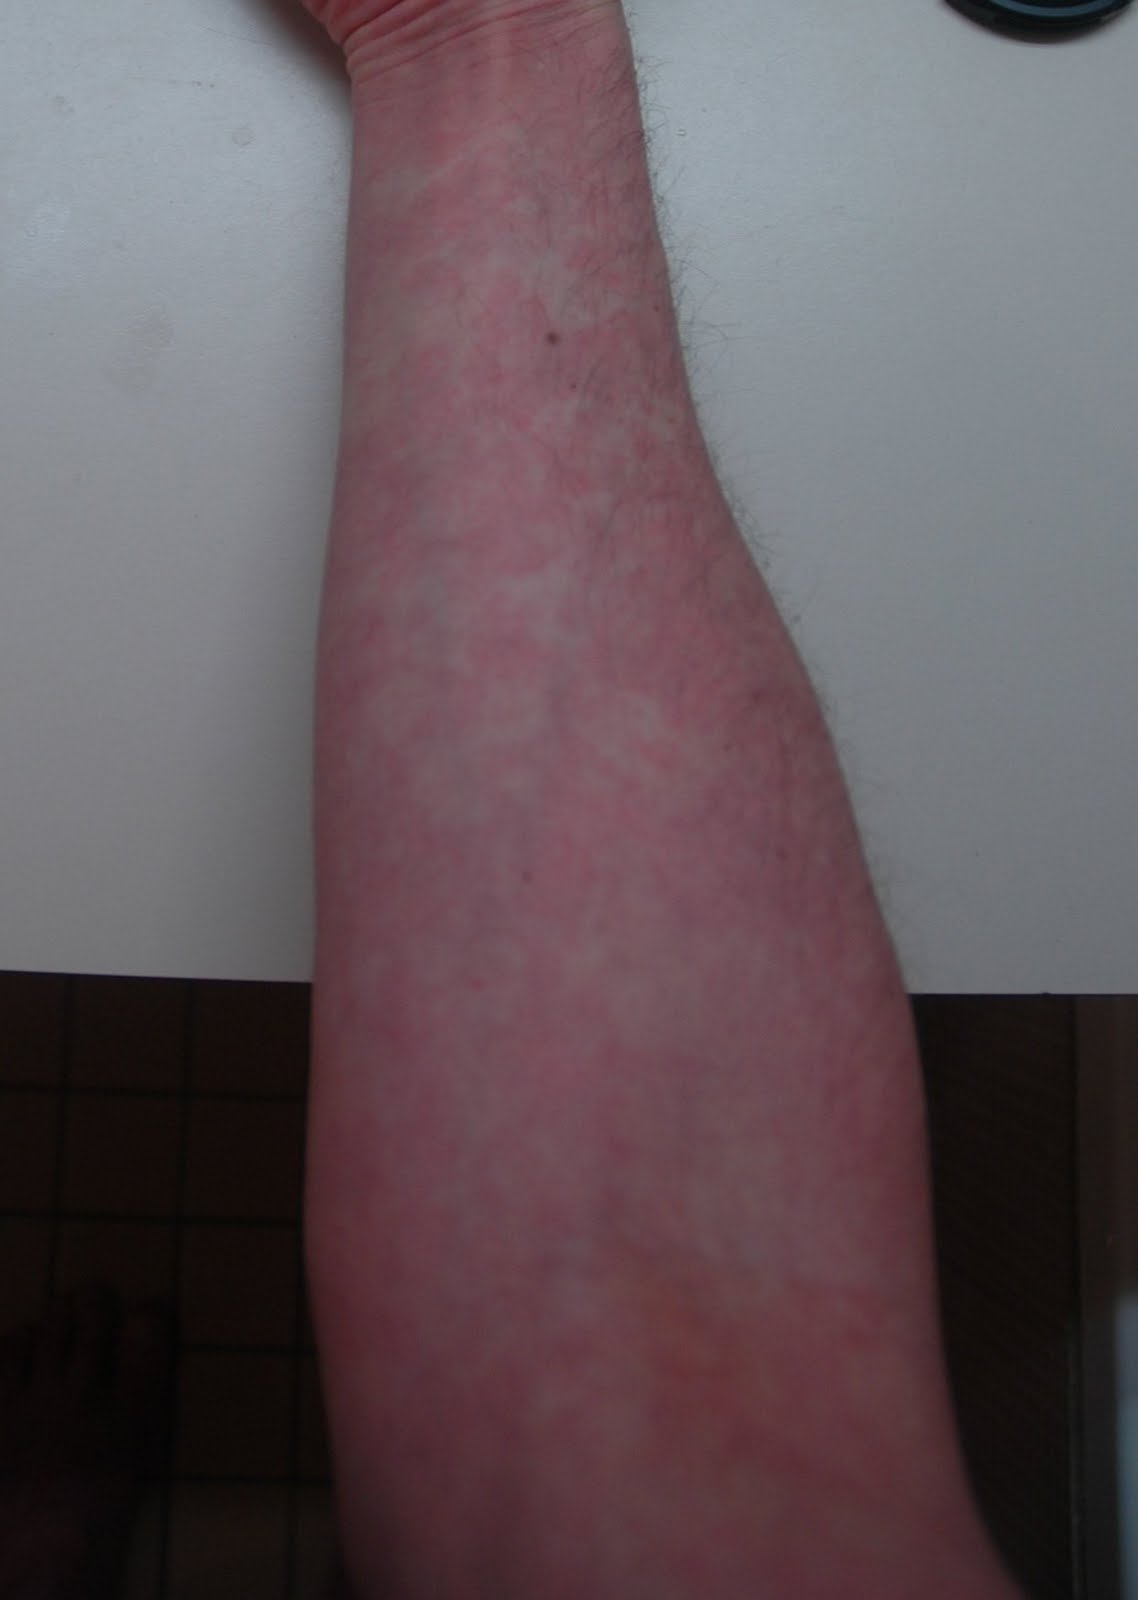 rash on forearms only